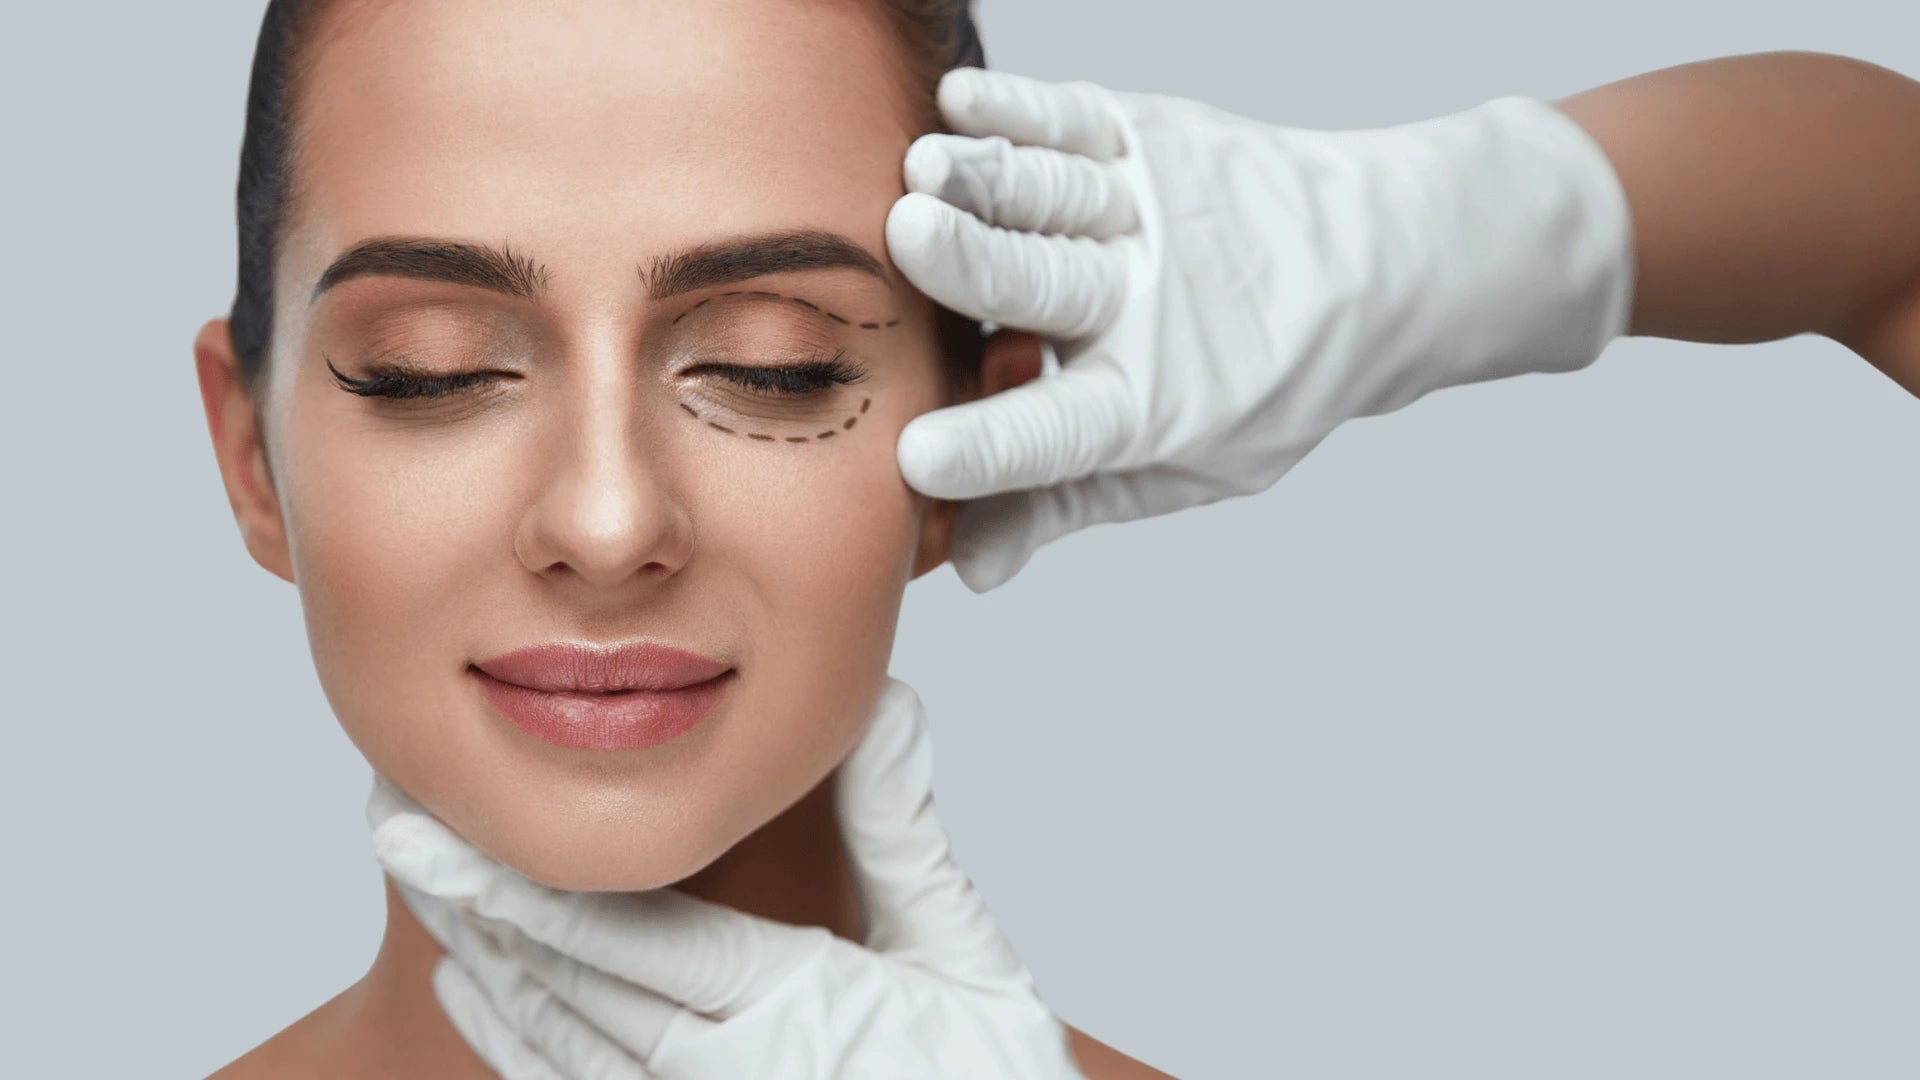 Scarless Blepharoplasty with Plexr by Dr. Maryam Hekmat Picture